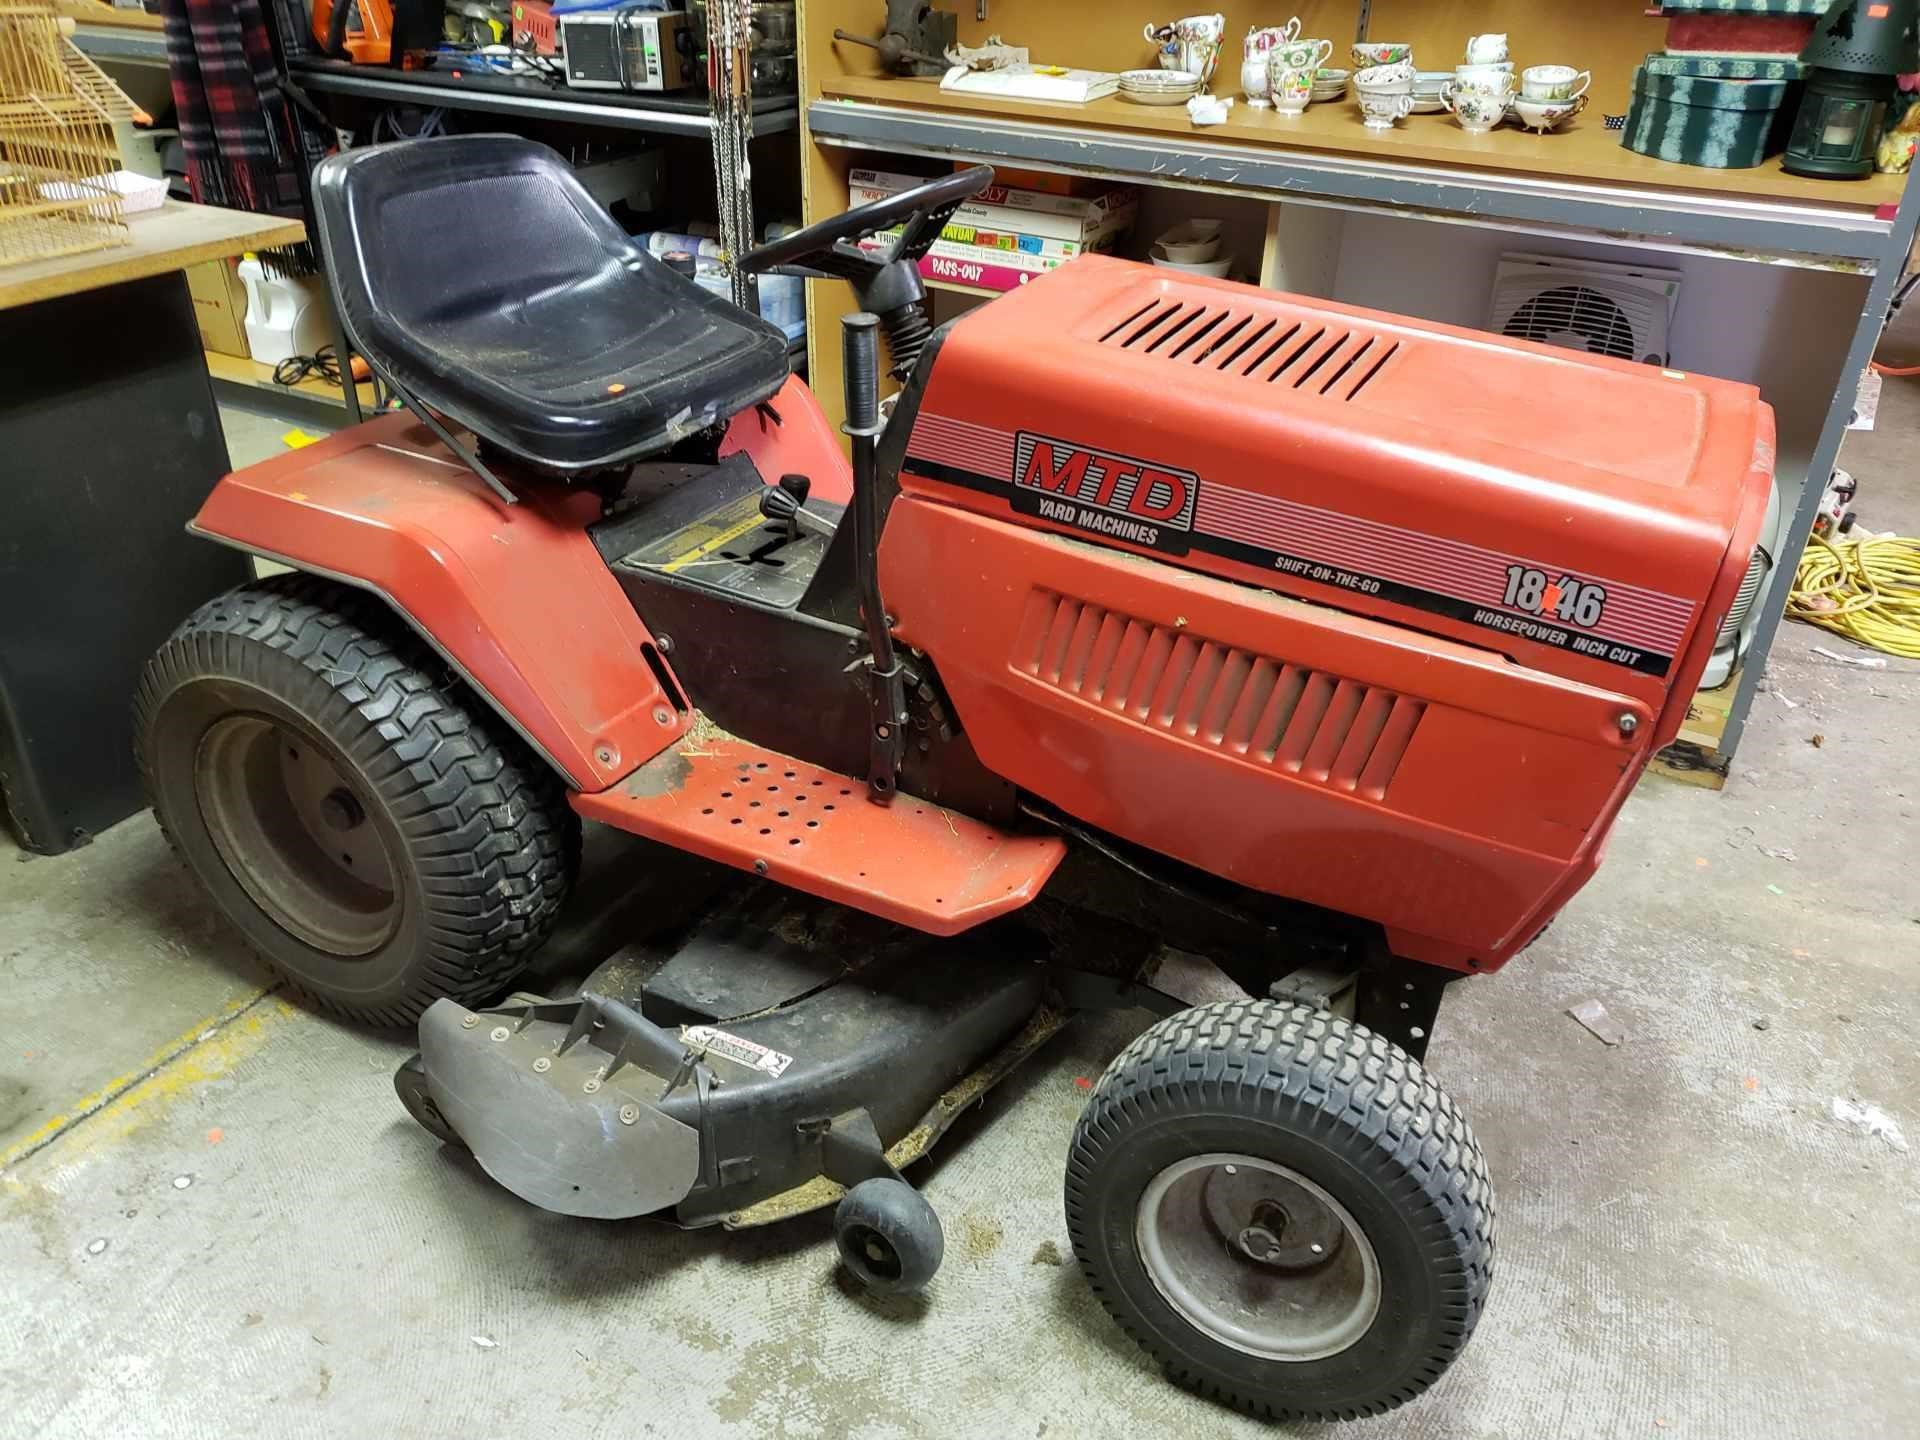 Clawson, Hegge Pt. 6 & Others Consignment Auction